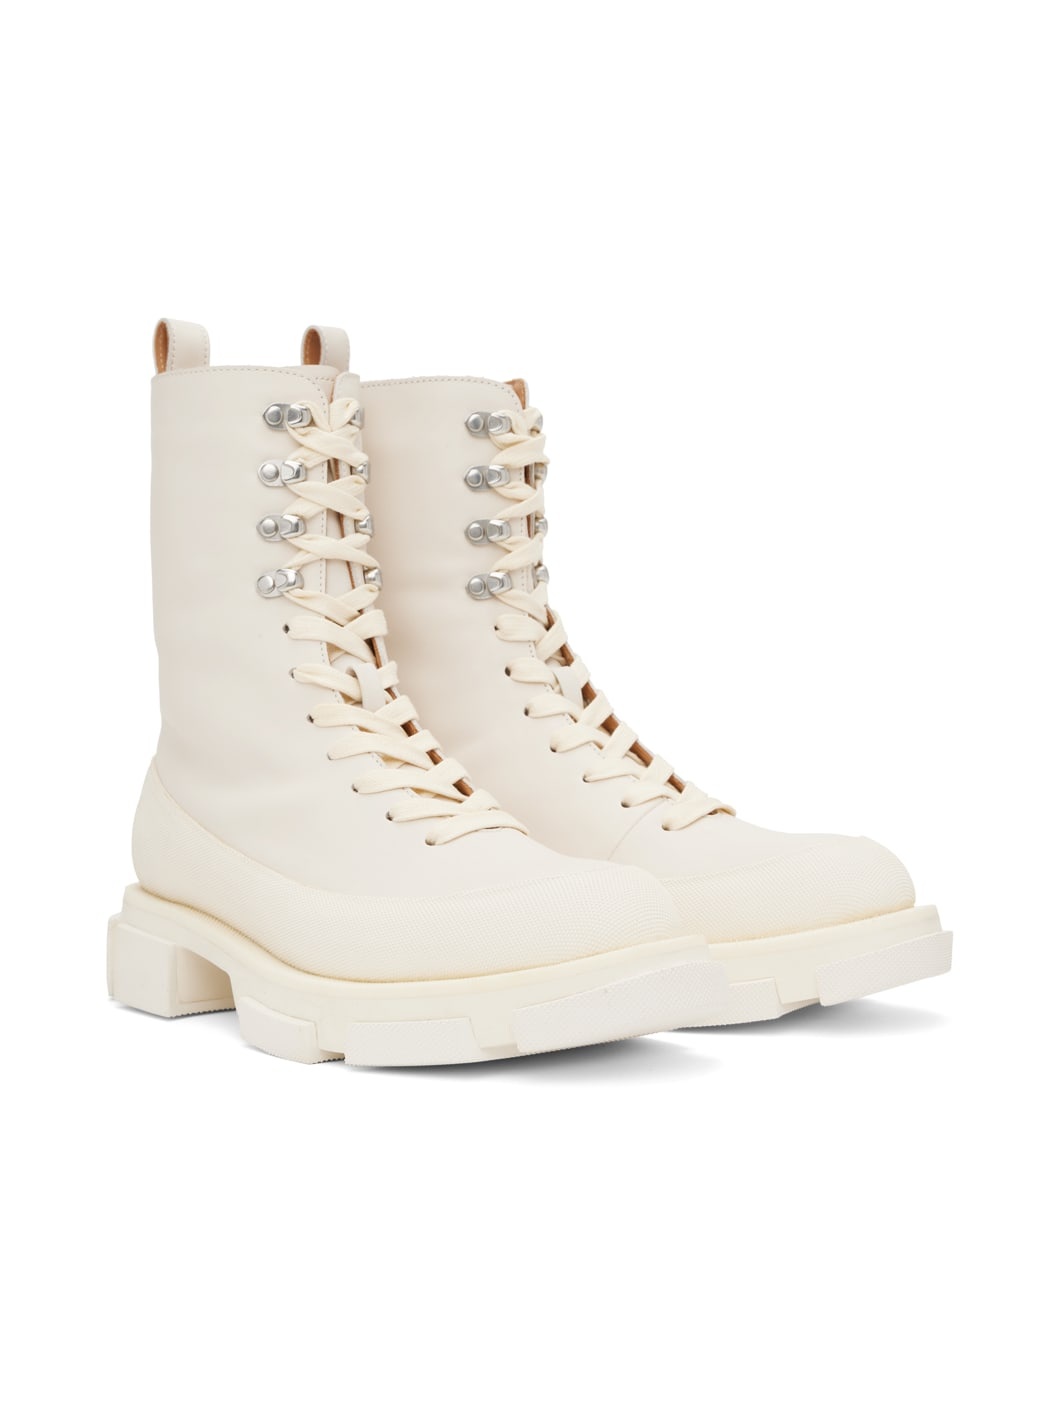 Off-White Gao High Boots - 4